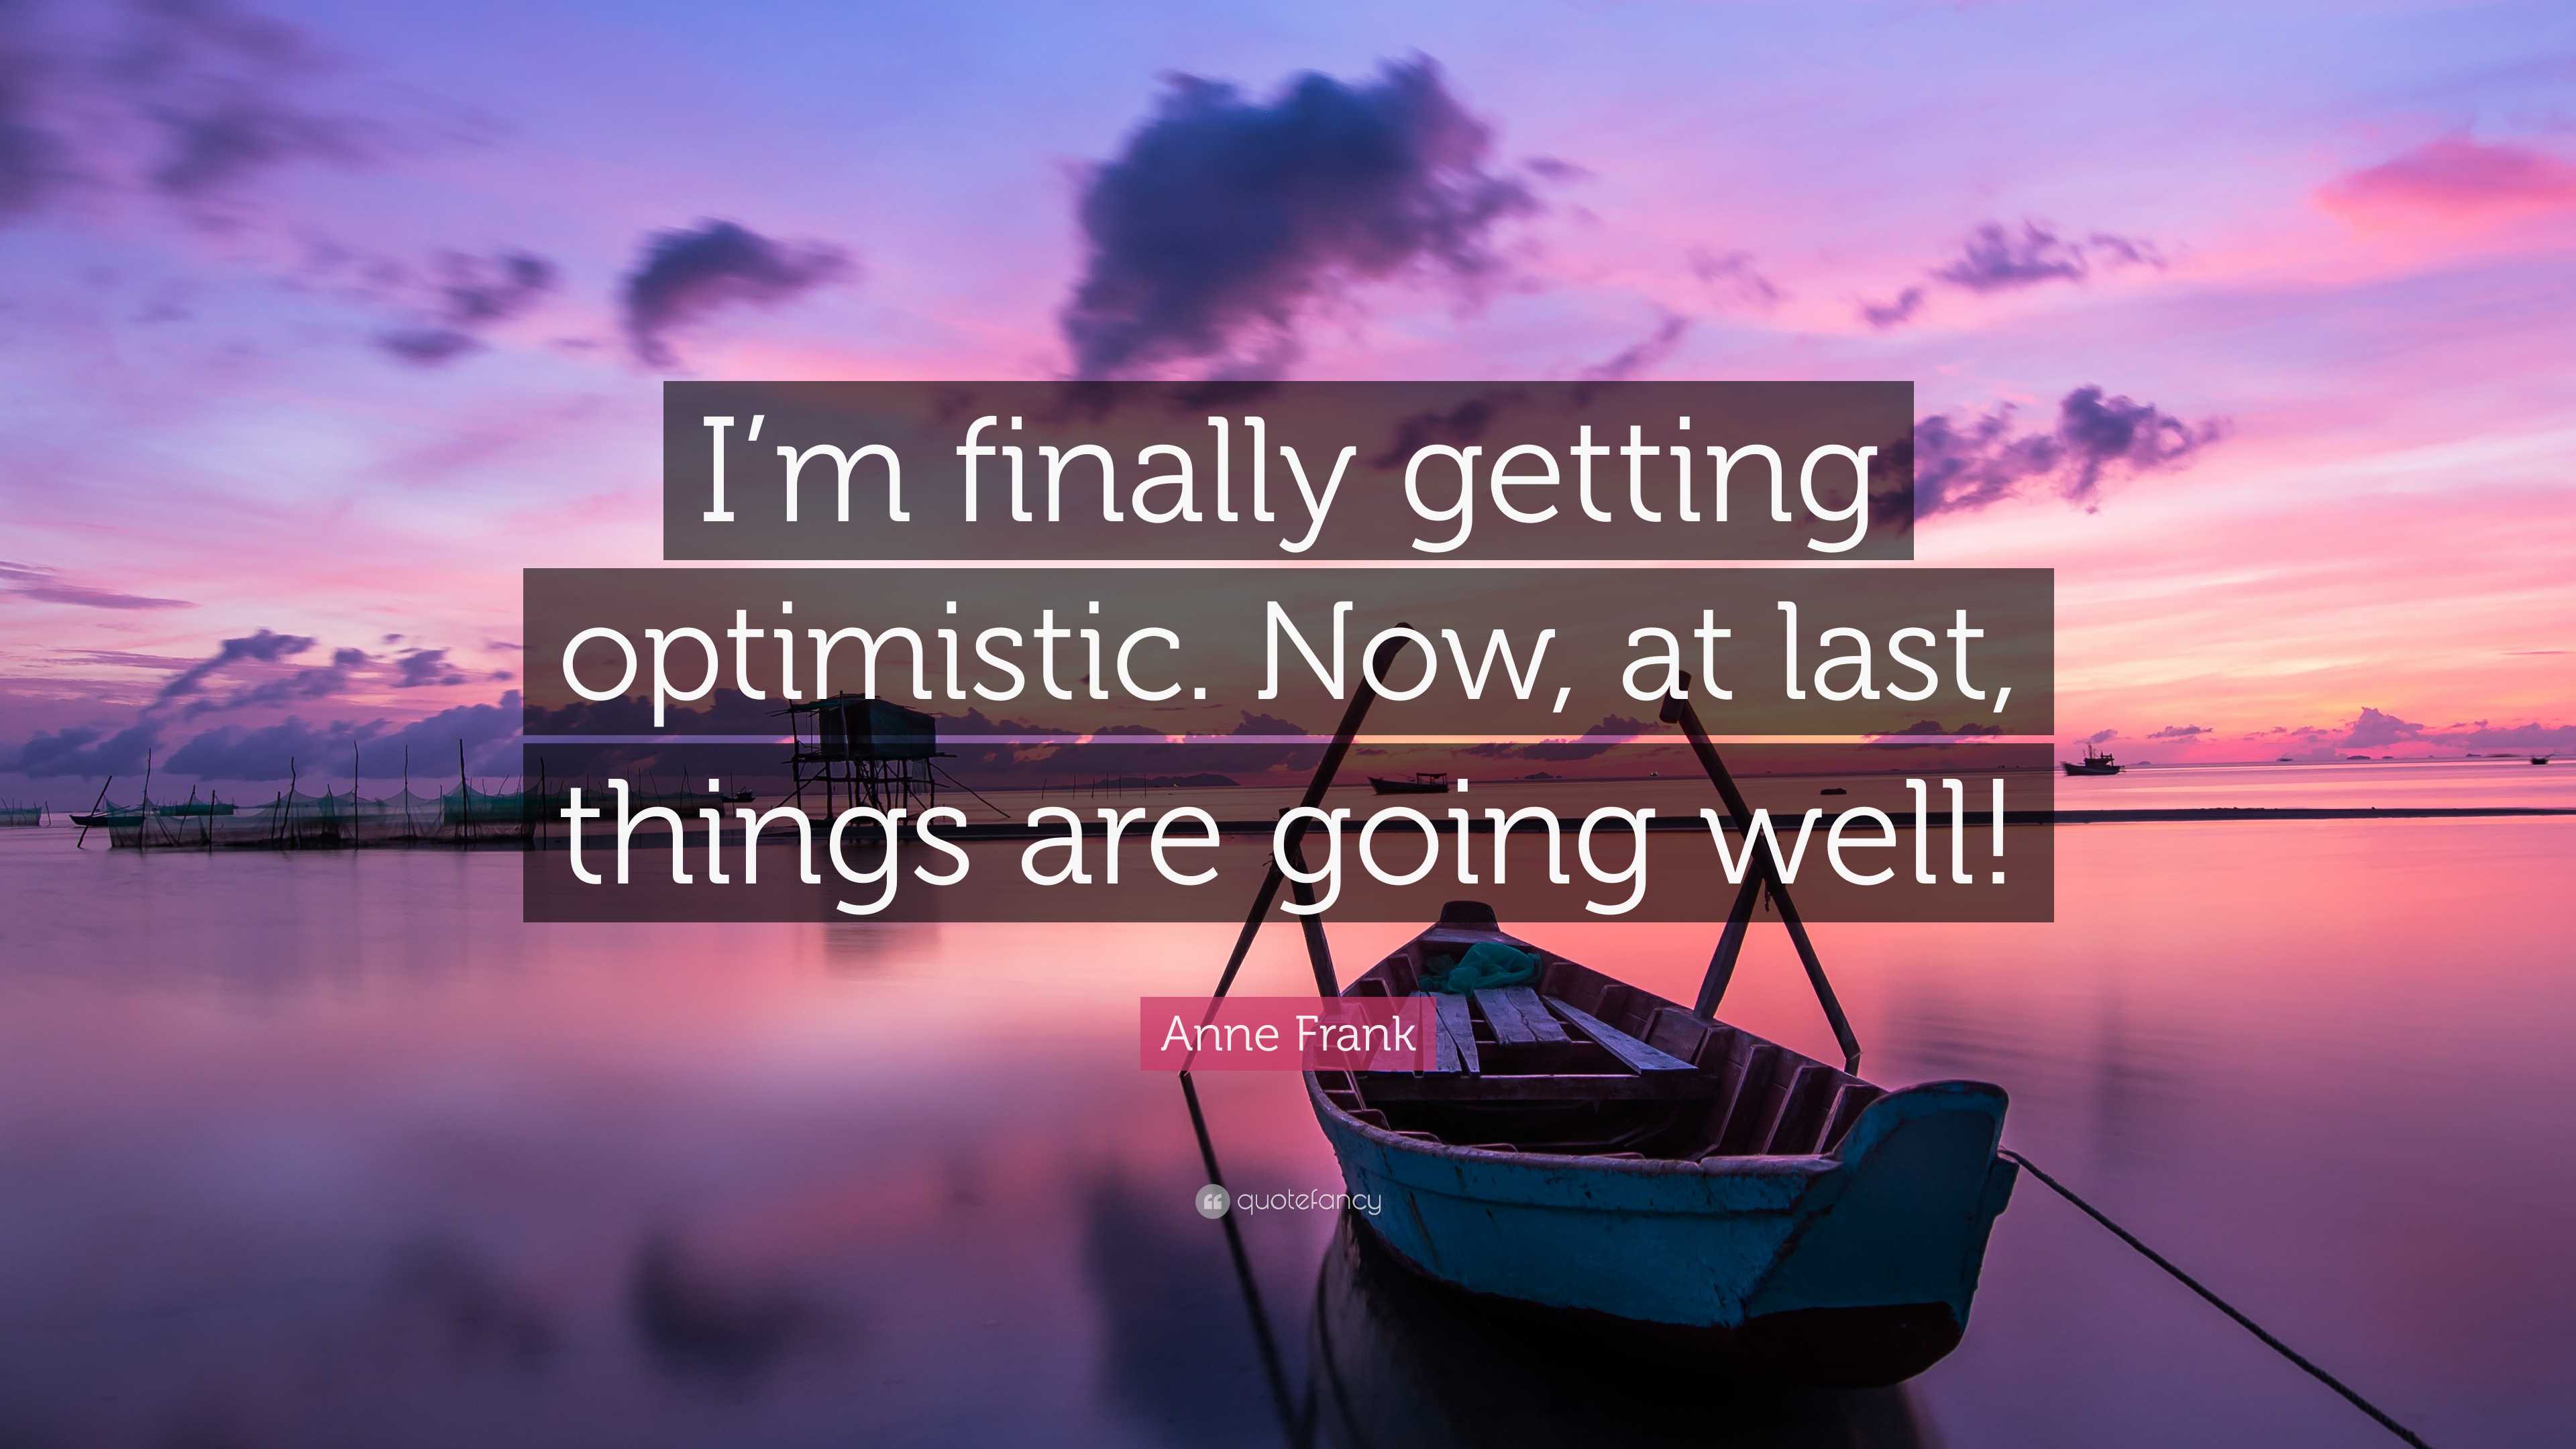 Anne Frank Quote: “I’m finally getting optimistic. Now, at last, things ...